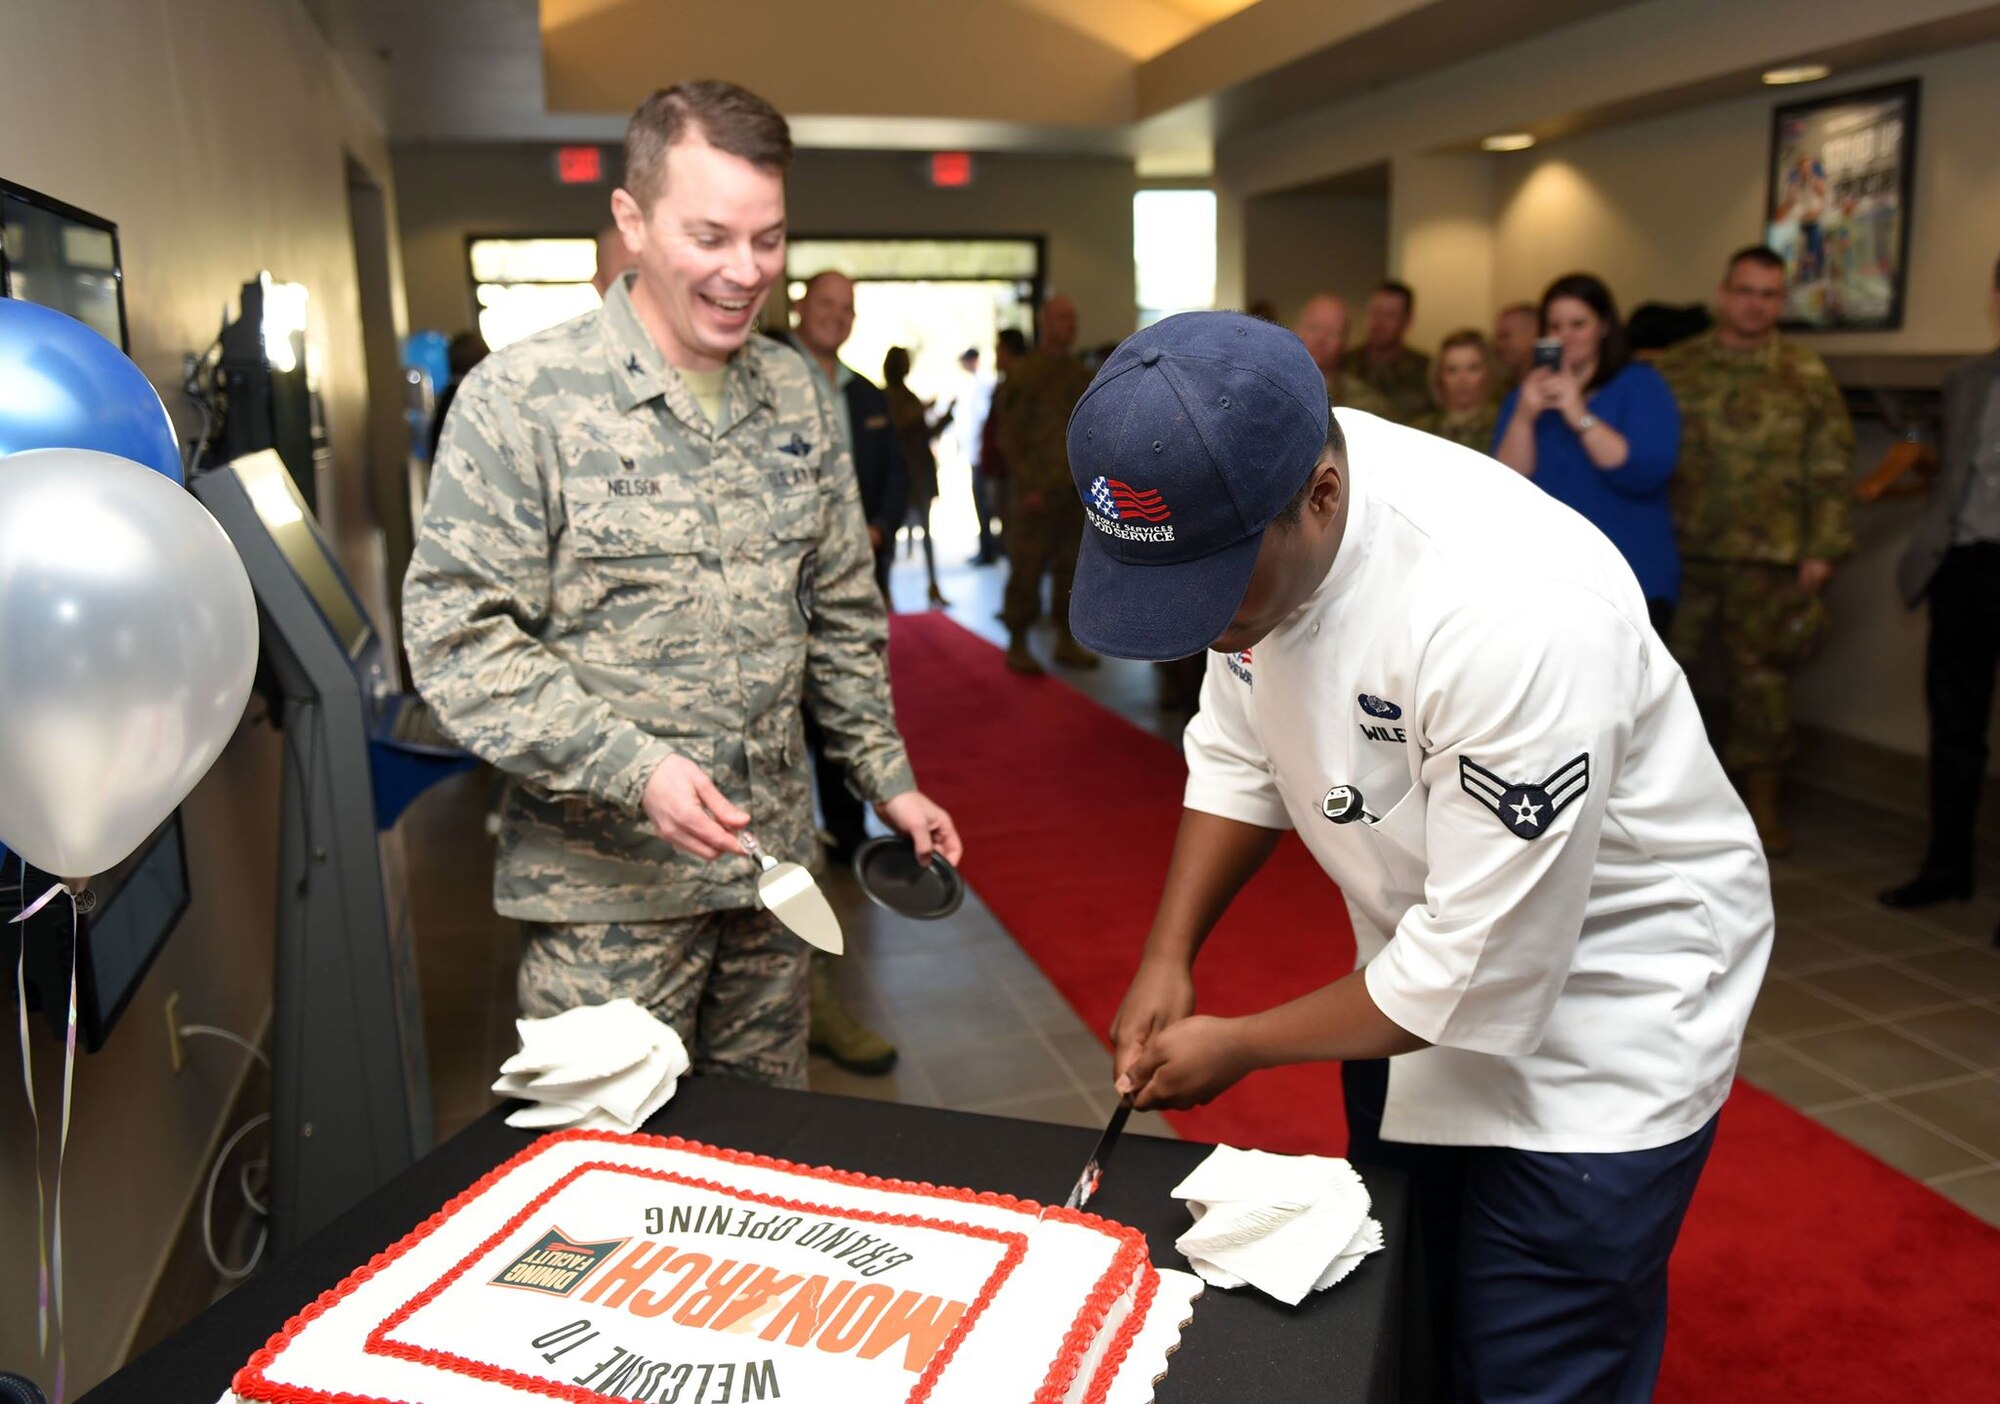 Col. Jeffrey Nelson, 60th Air Mobility Wing commander, and Airman 1st Class Keith Wiley, 60th Force Support Squadron food service apprentice, cut a cake made in celebration of Travis Air Force Base's reopening of its base dining facility. Throughout the reconstruction and renovation of the dining facility, the 60th FSS had been serving Airmen from a side room in the base's Delta Breeze Club. (U.S. Air Force photo by Airman 1st Class Christian Conrad)